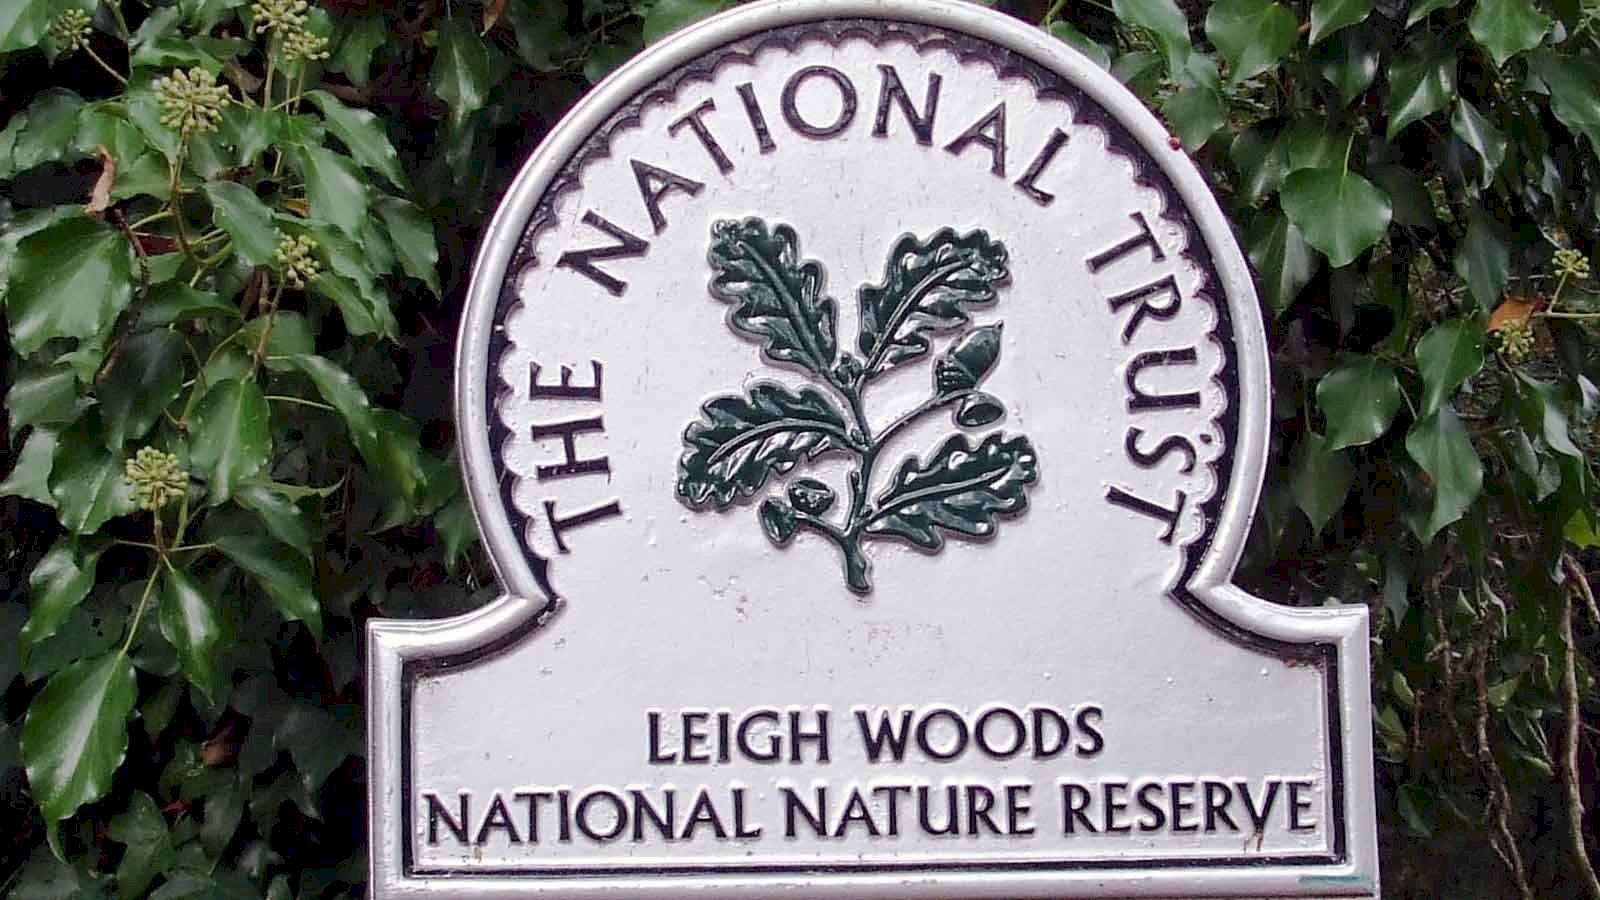 Picture showing the familiar national trust plaque for Leigh Woods National Nature Reserve.